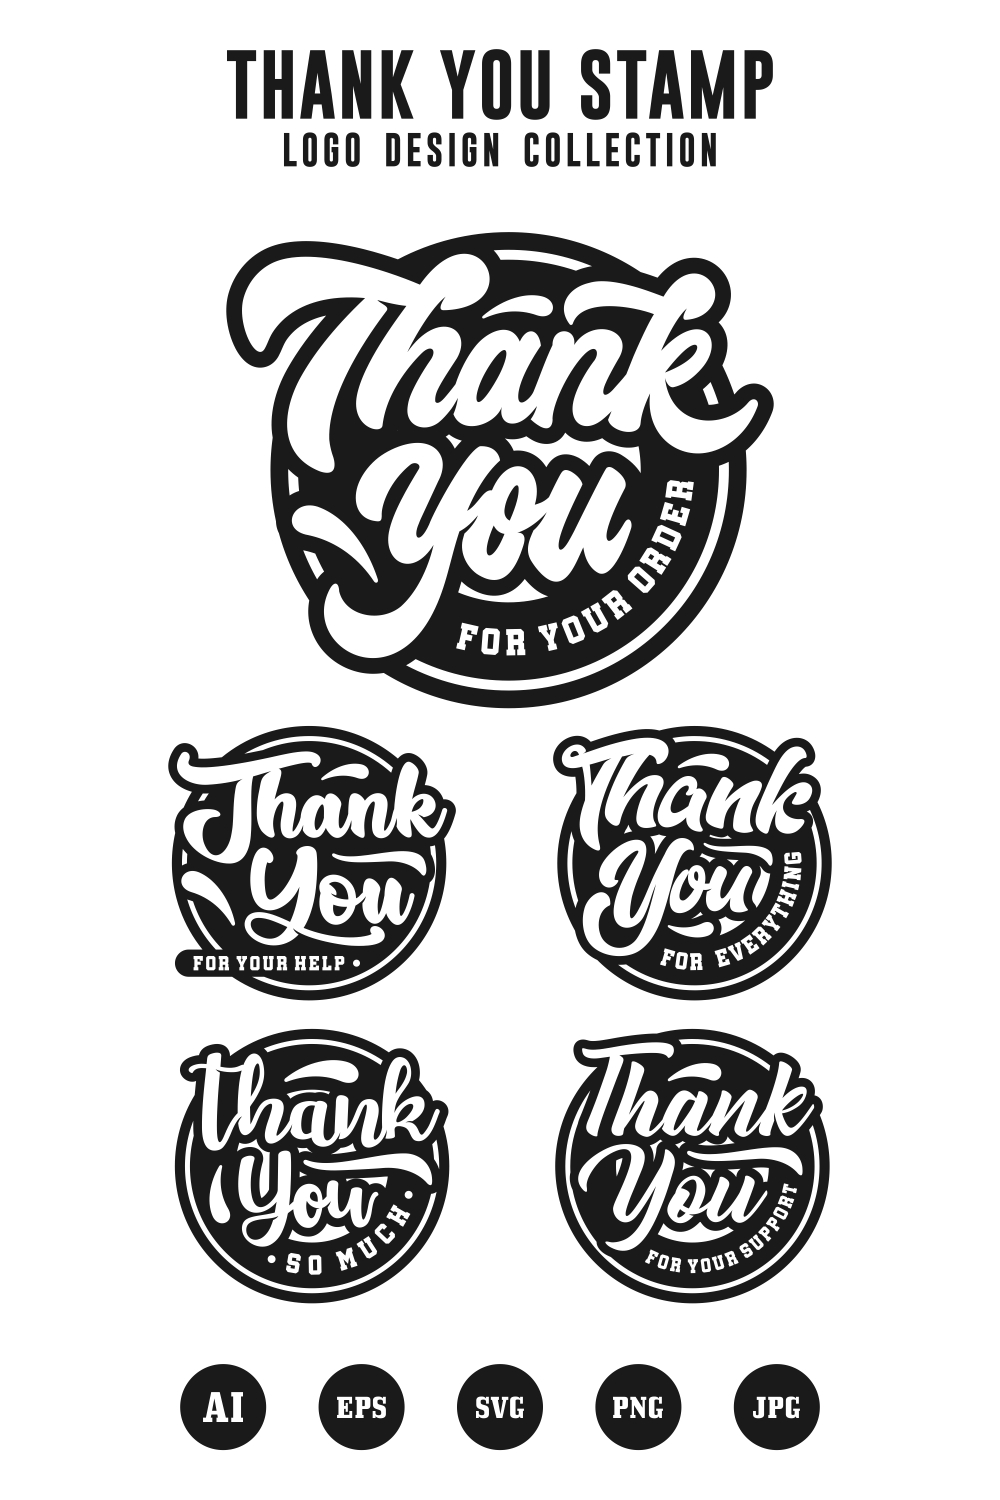 Set thank you stamp logo design collection - $10 pinterest preview image.